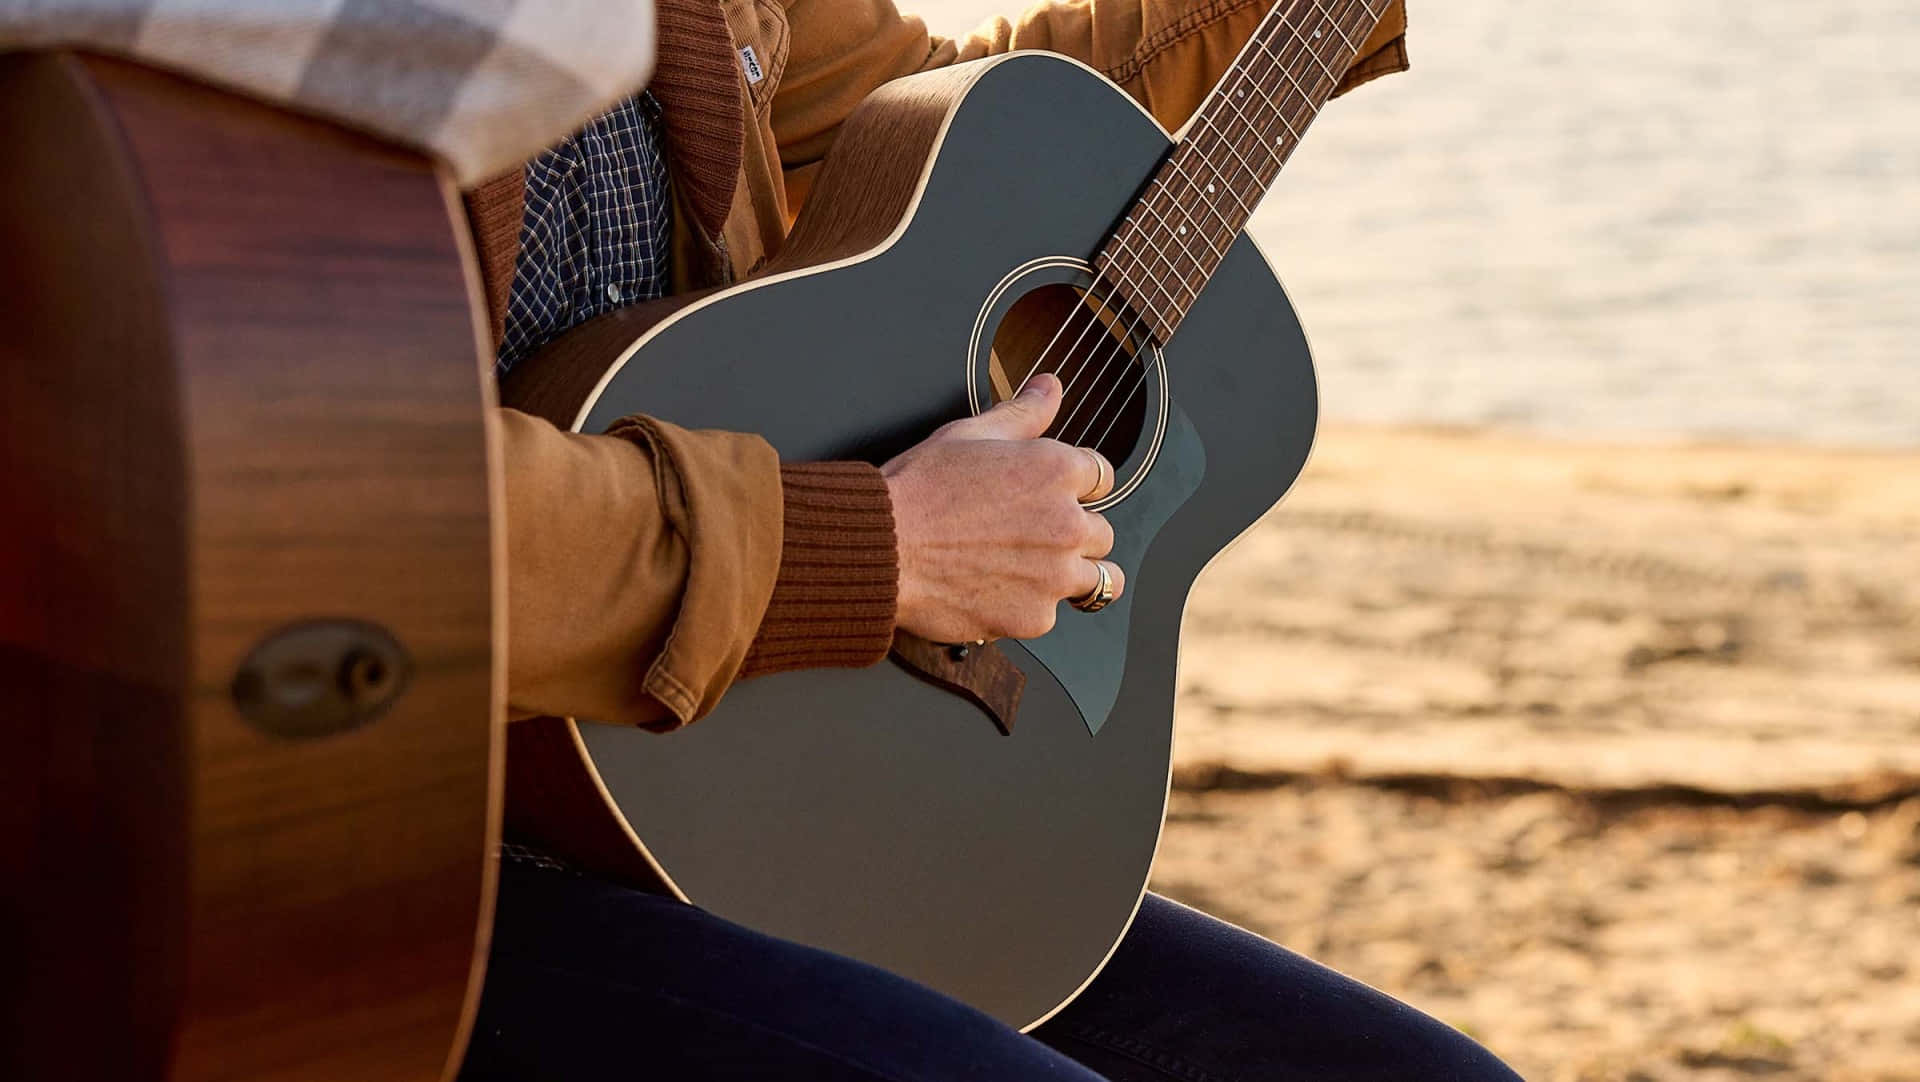 Strum Away with a Beautiful Acoustic Guitar